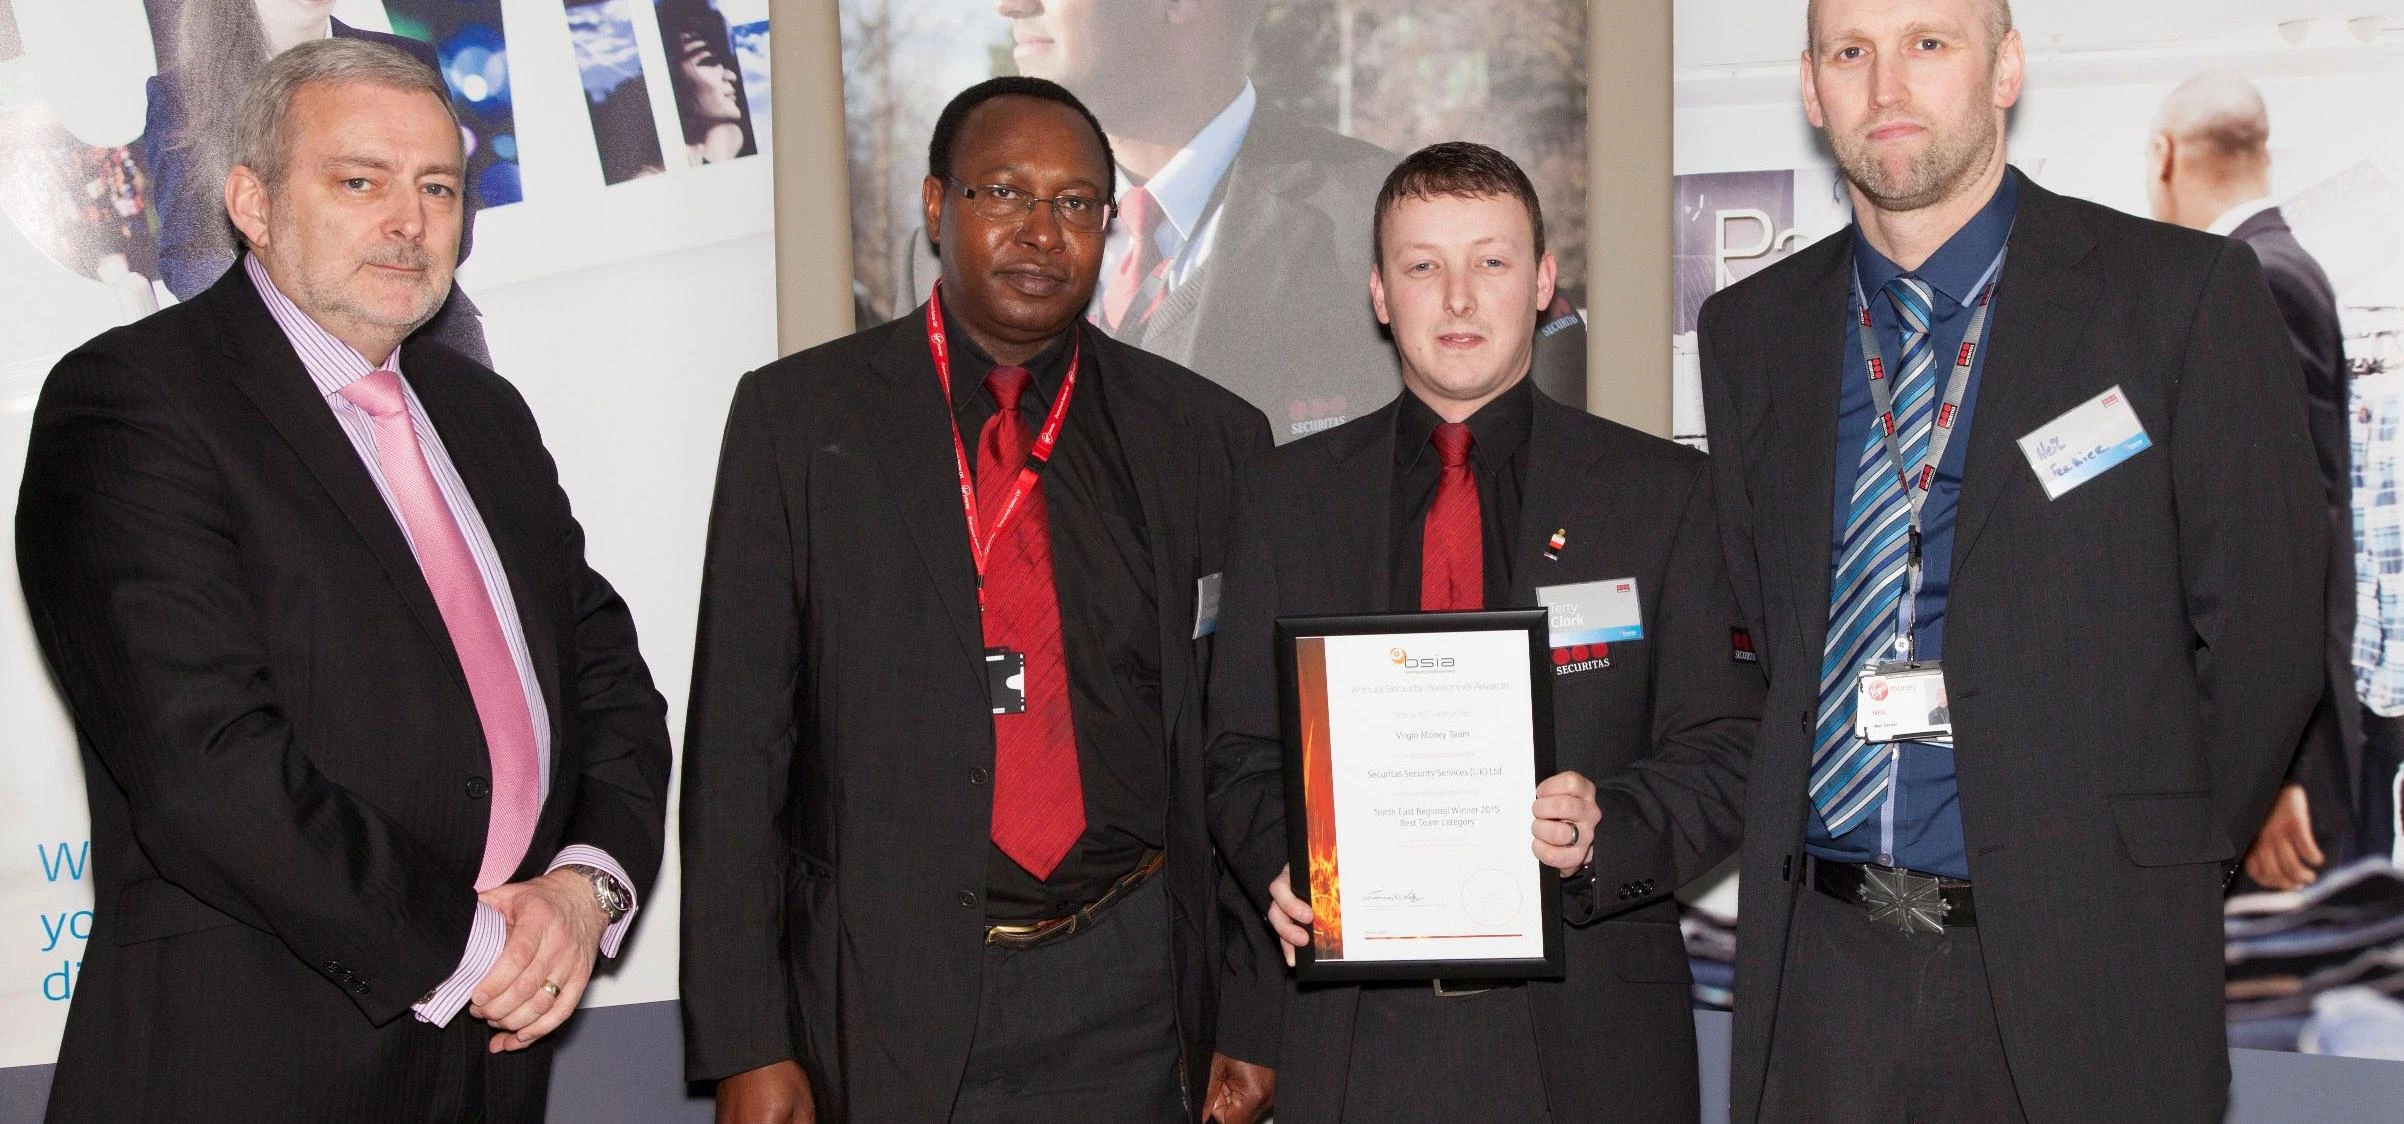 Members of the team receive their award from BSIA Director, Trevor Elliot